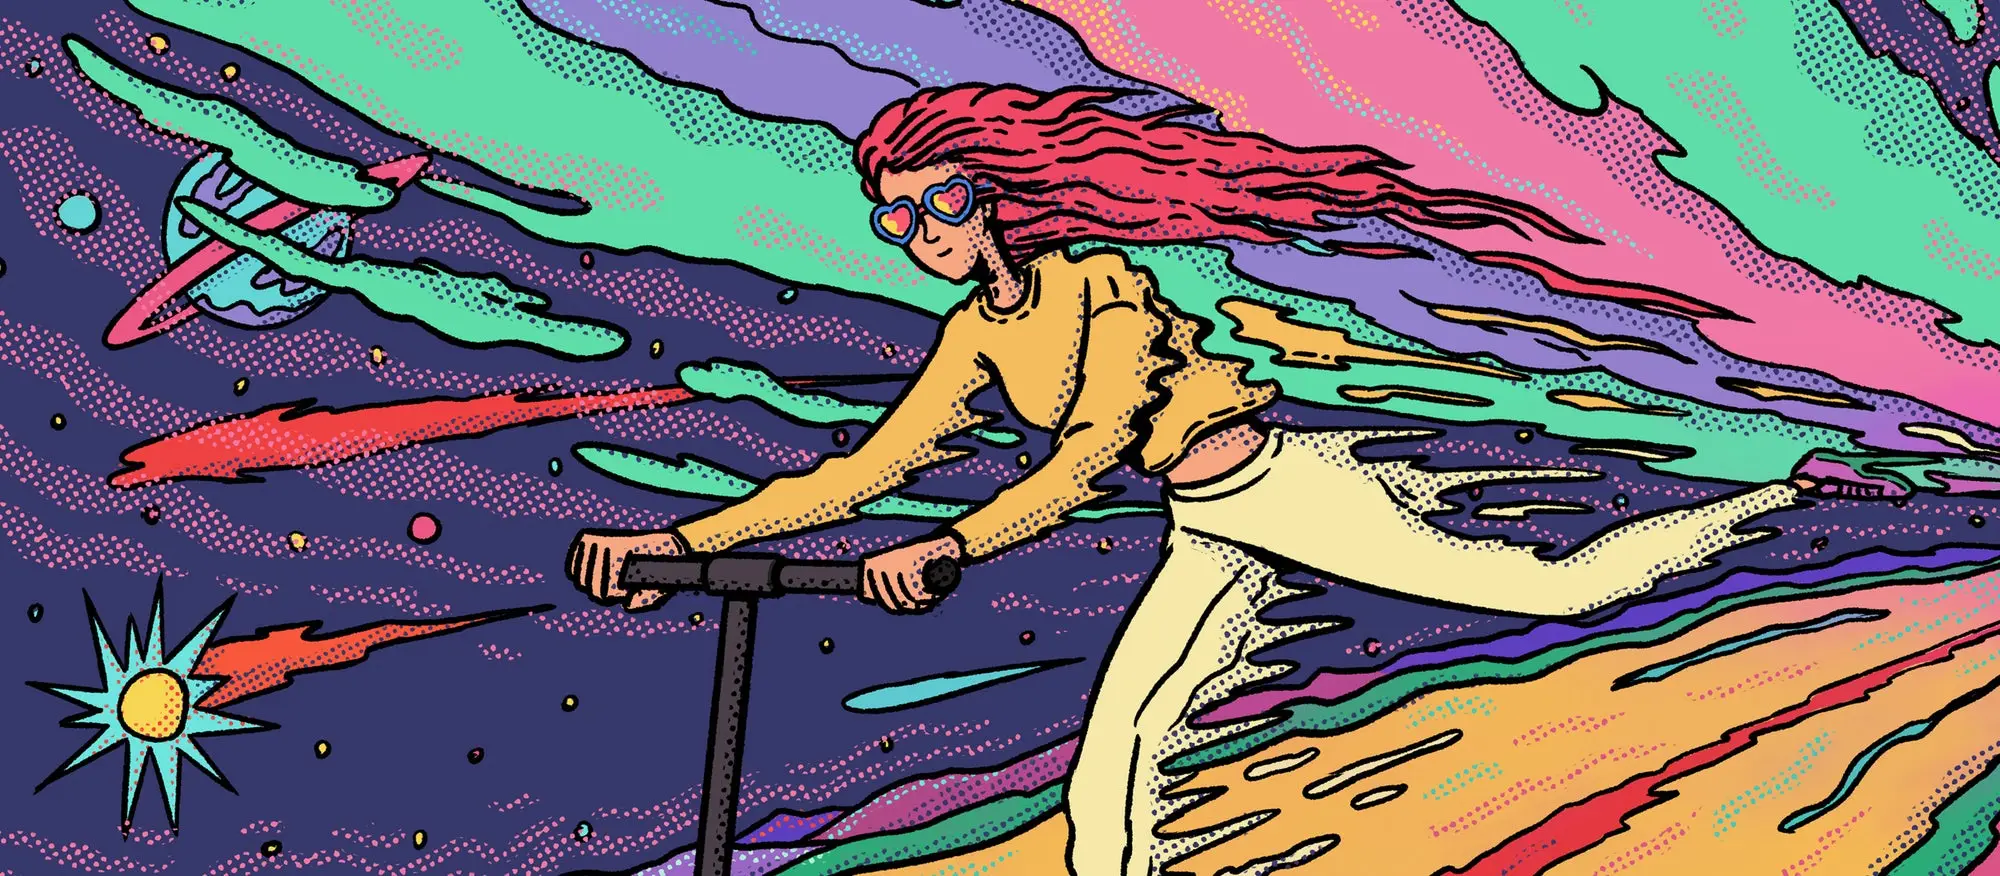 Illustration Of Young Cute Redhead Girl Riding An Electric Scooter On Colorful Fantasy Planet.